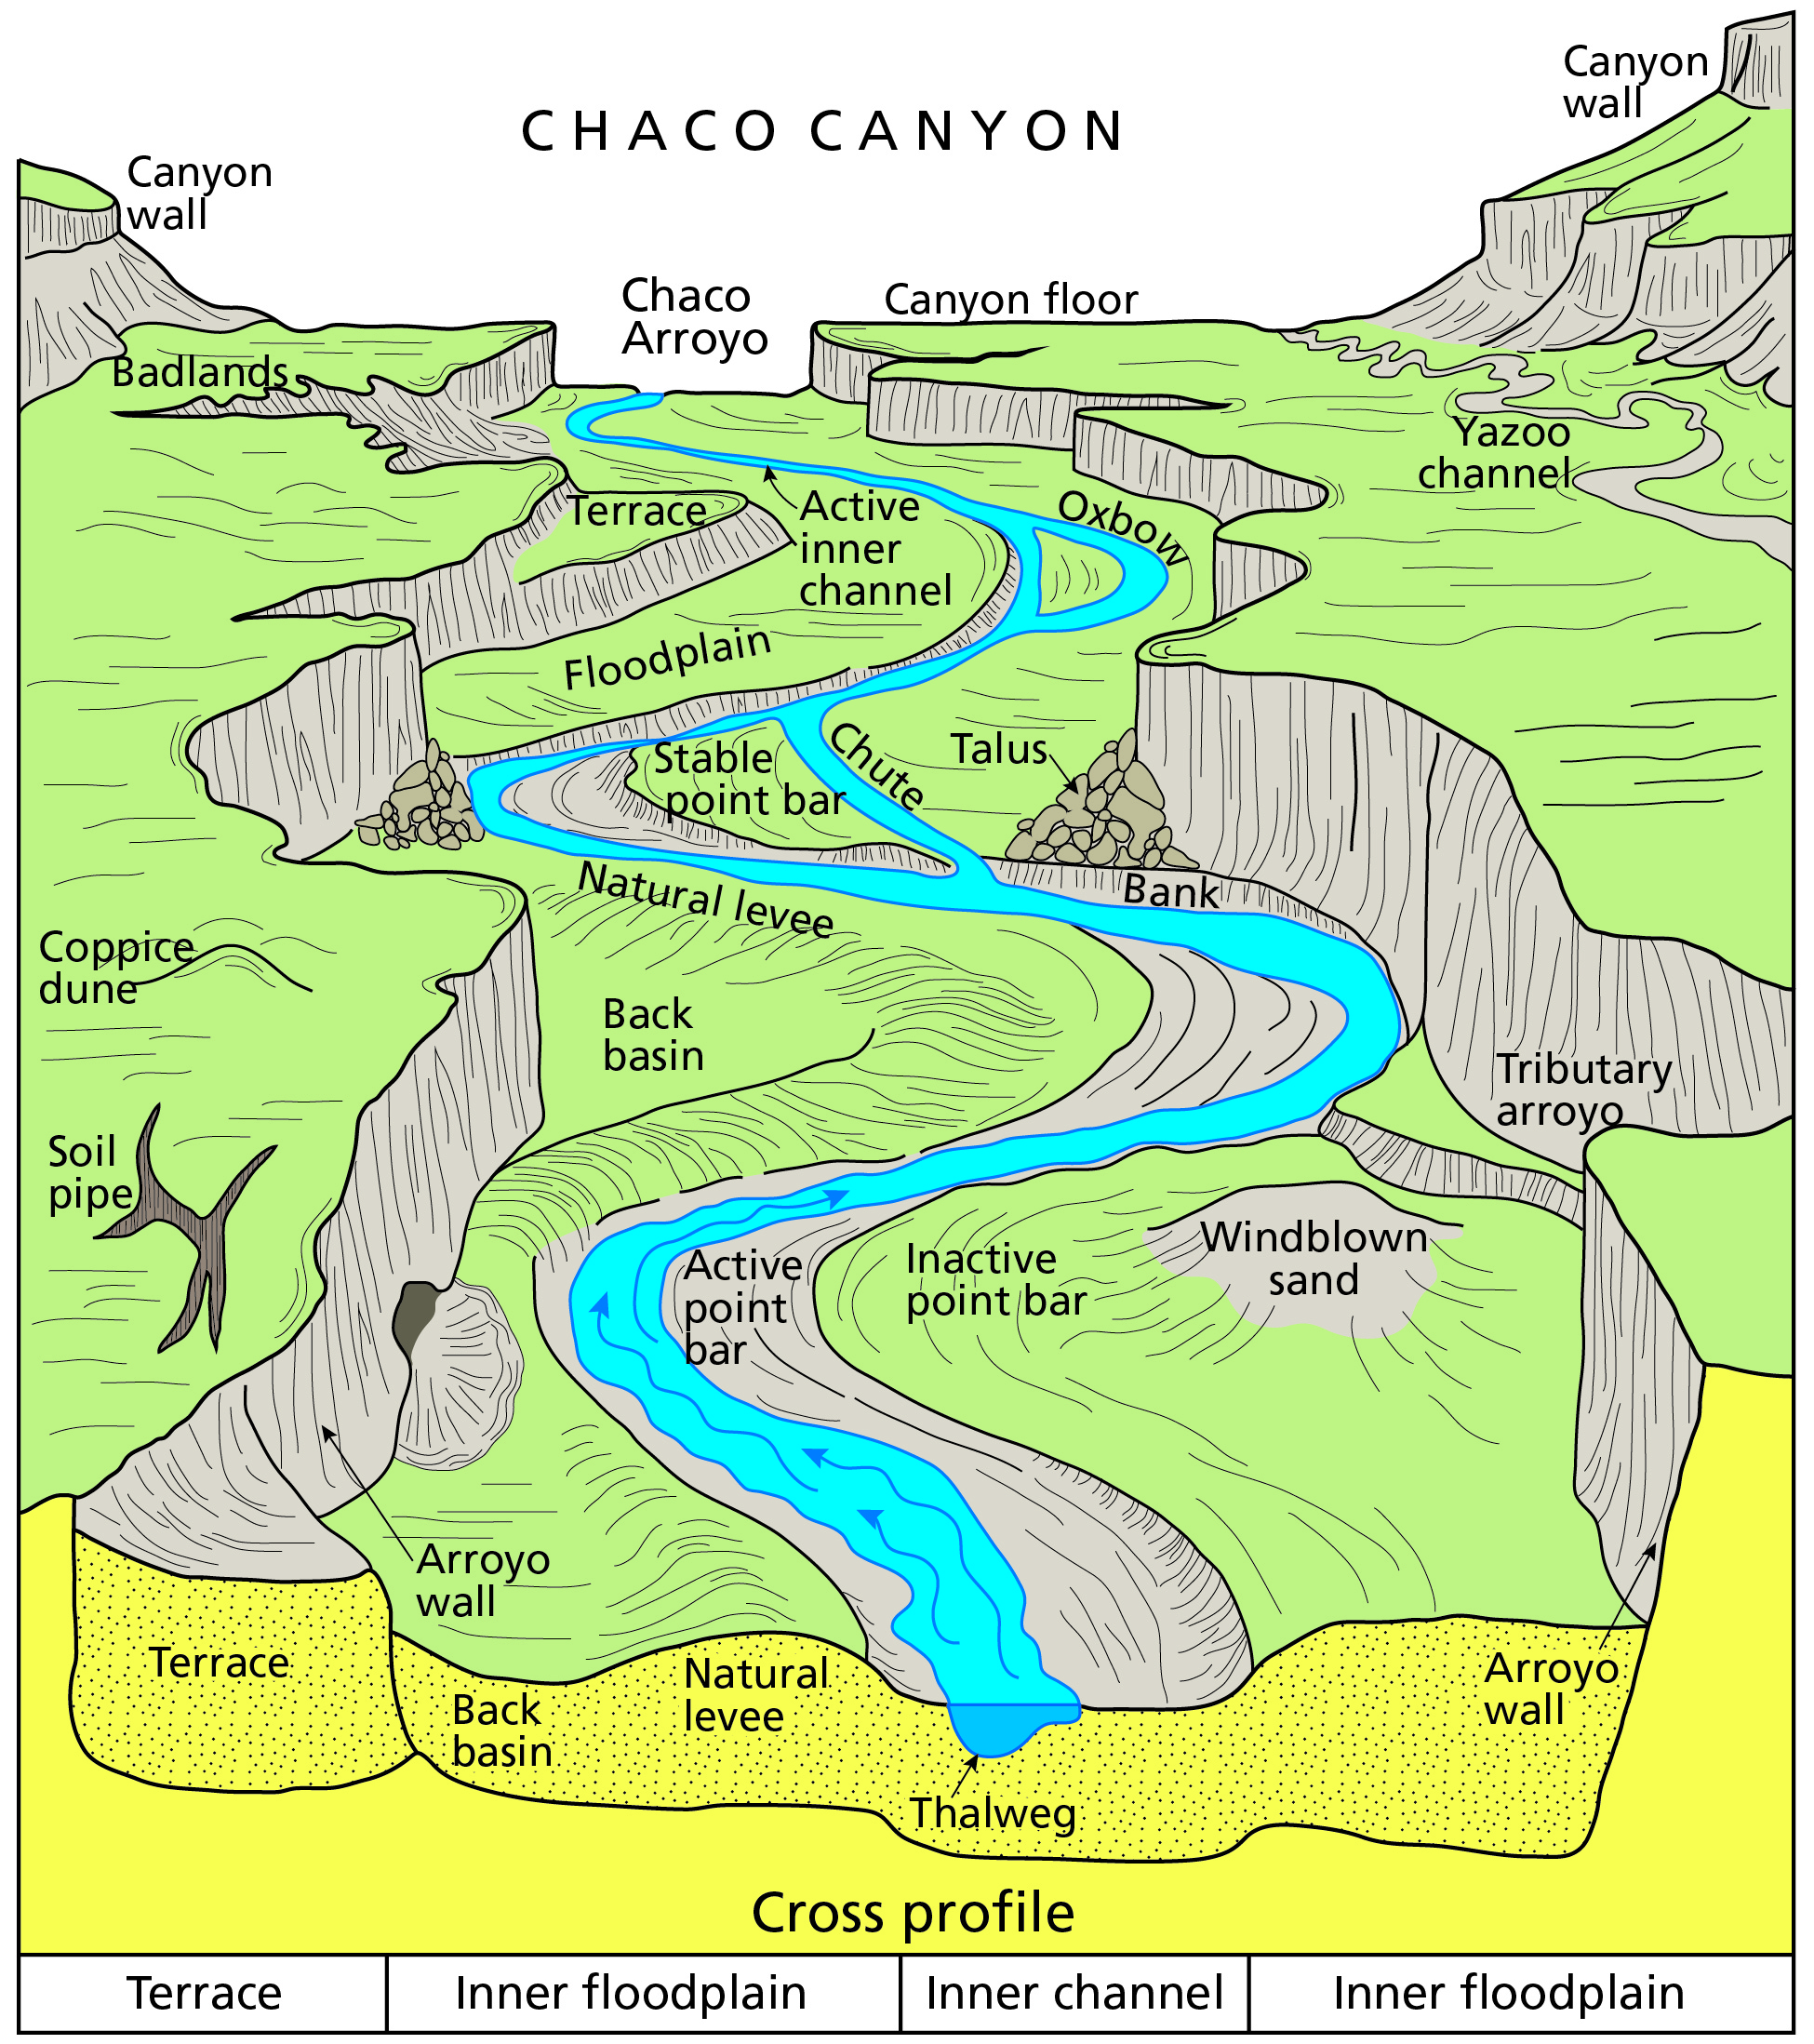 River Systems and Fluvial Landforms - Geology (. National Park Service)